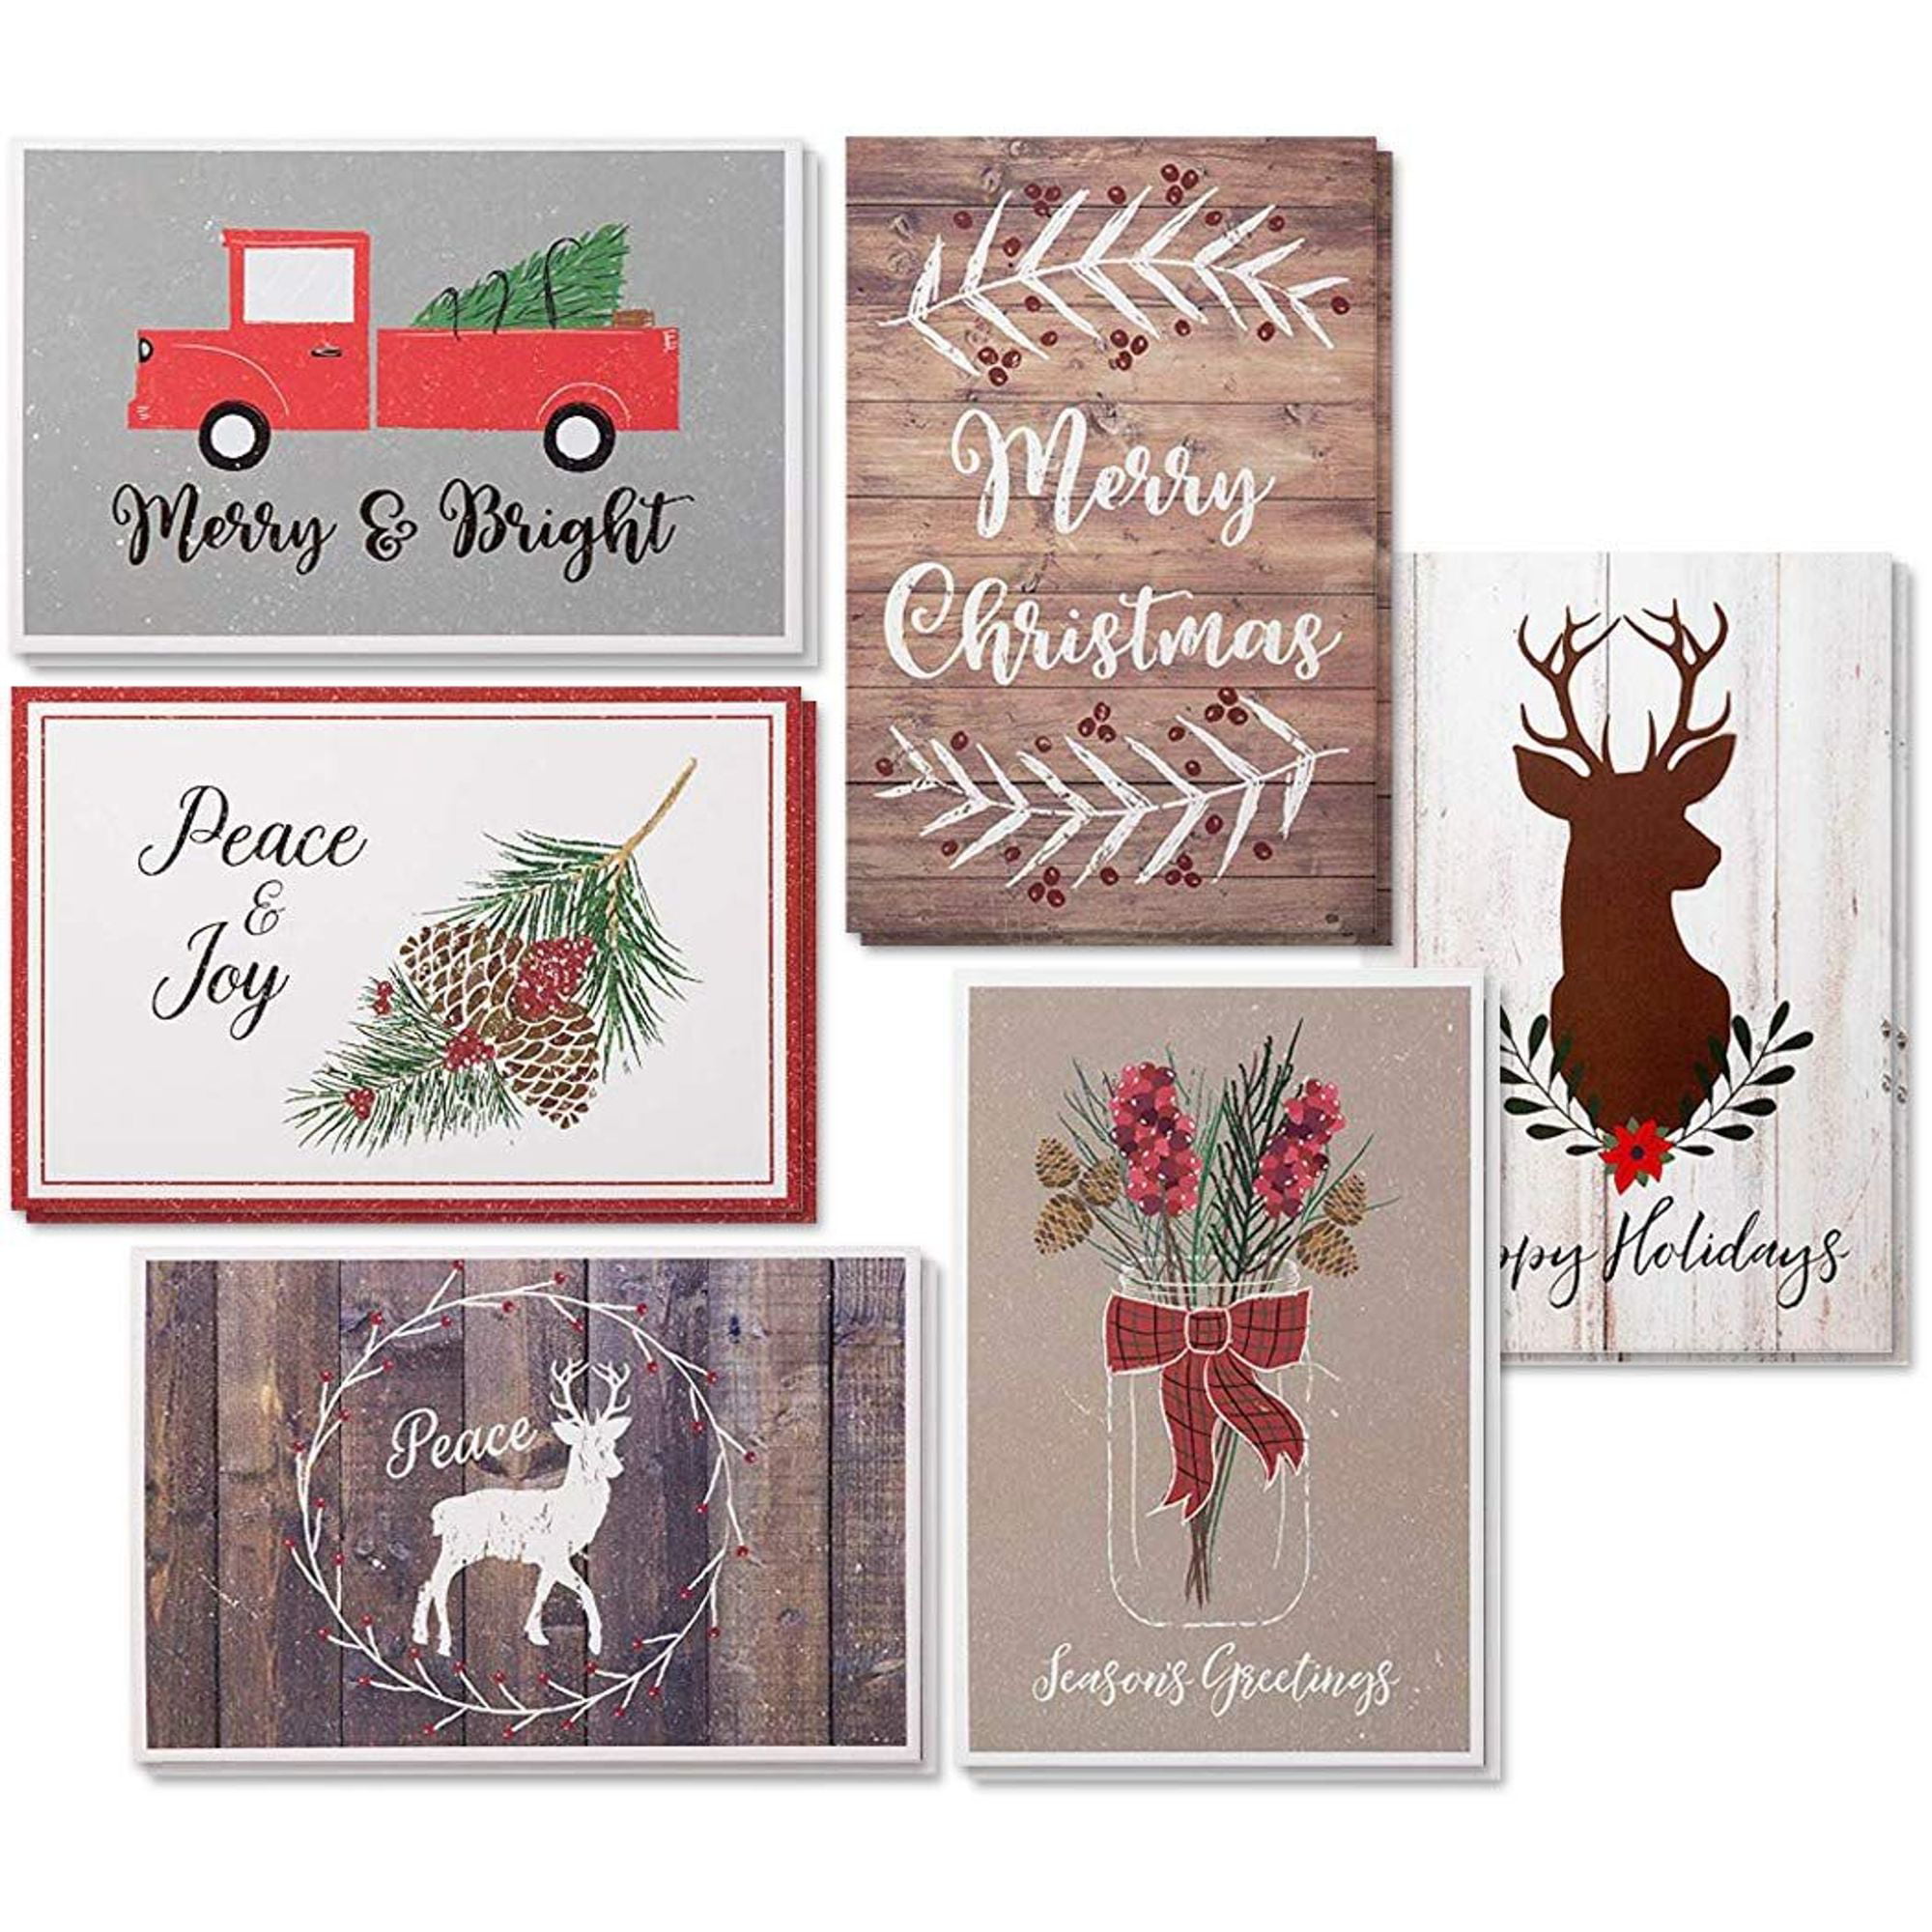 48-Pack Merry Christmas Holiday Greeting Card - Rustic Happy Holidays Xmas Cards in 6 Designs